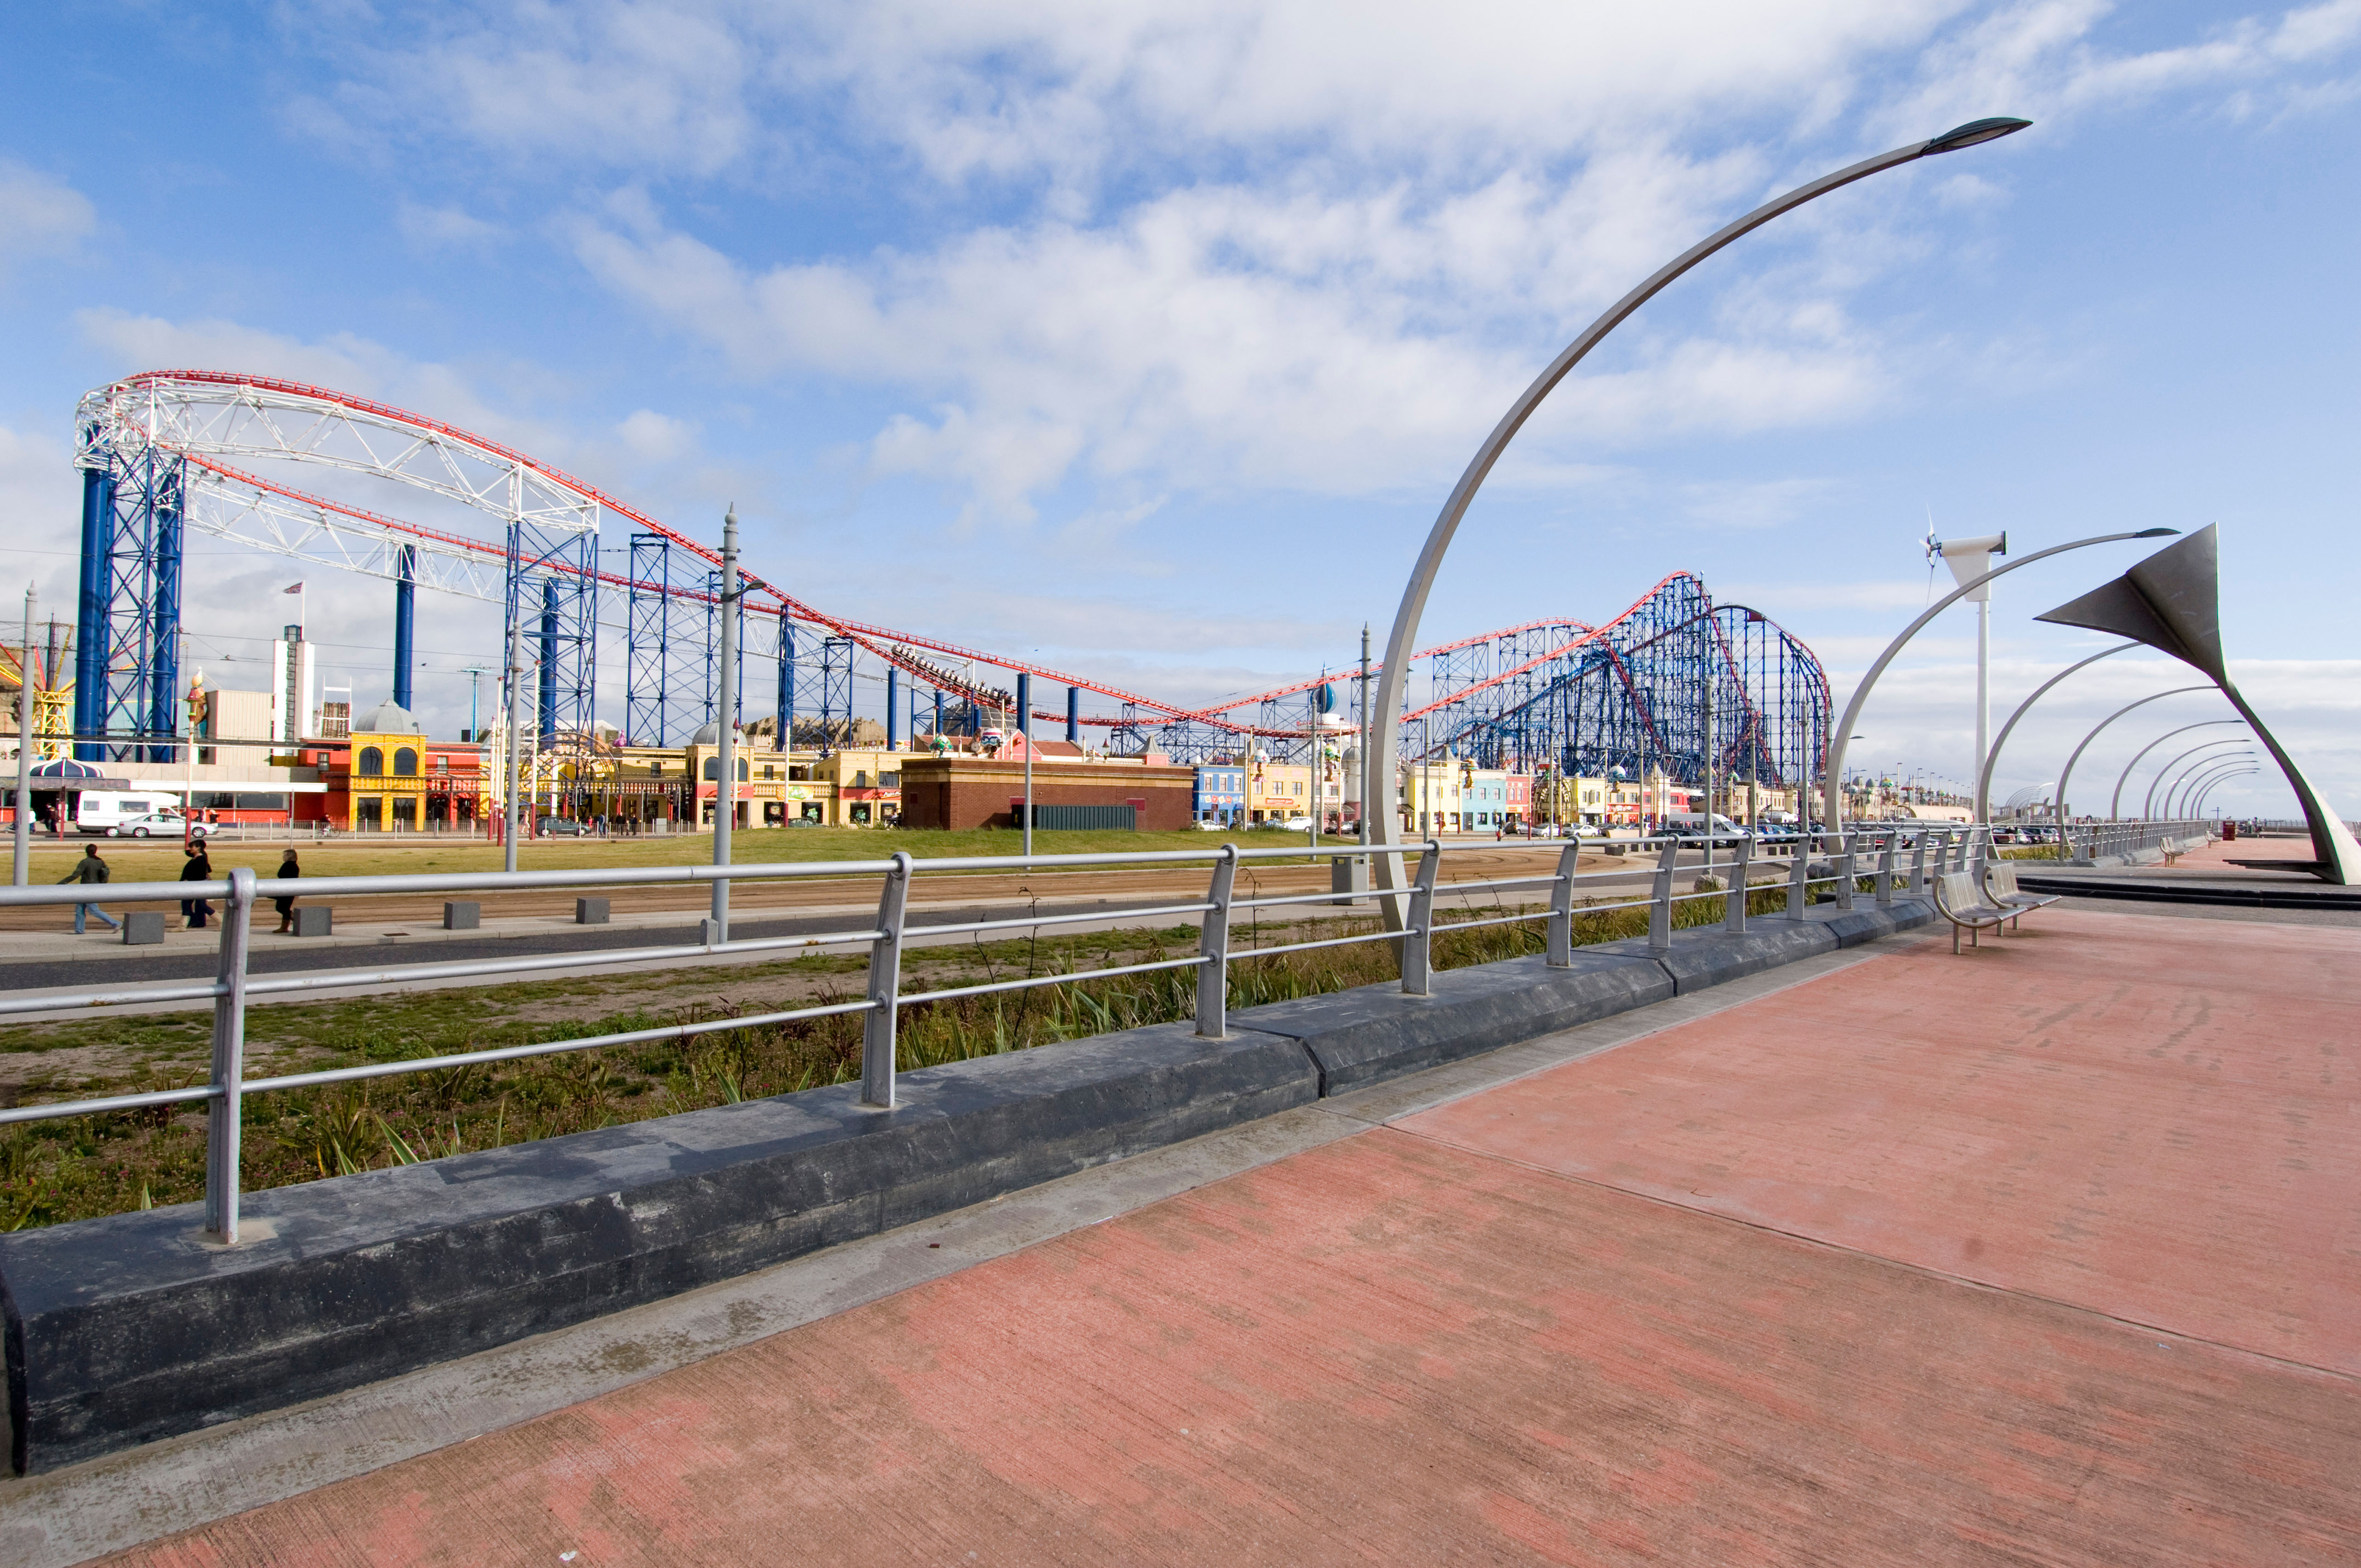 Blackpool Pleasure Beach is the first theme park in Europe to be given the awards